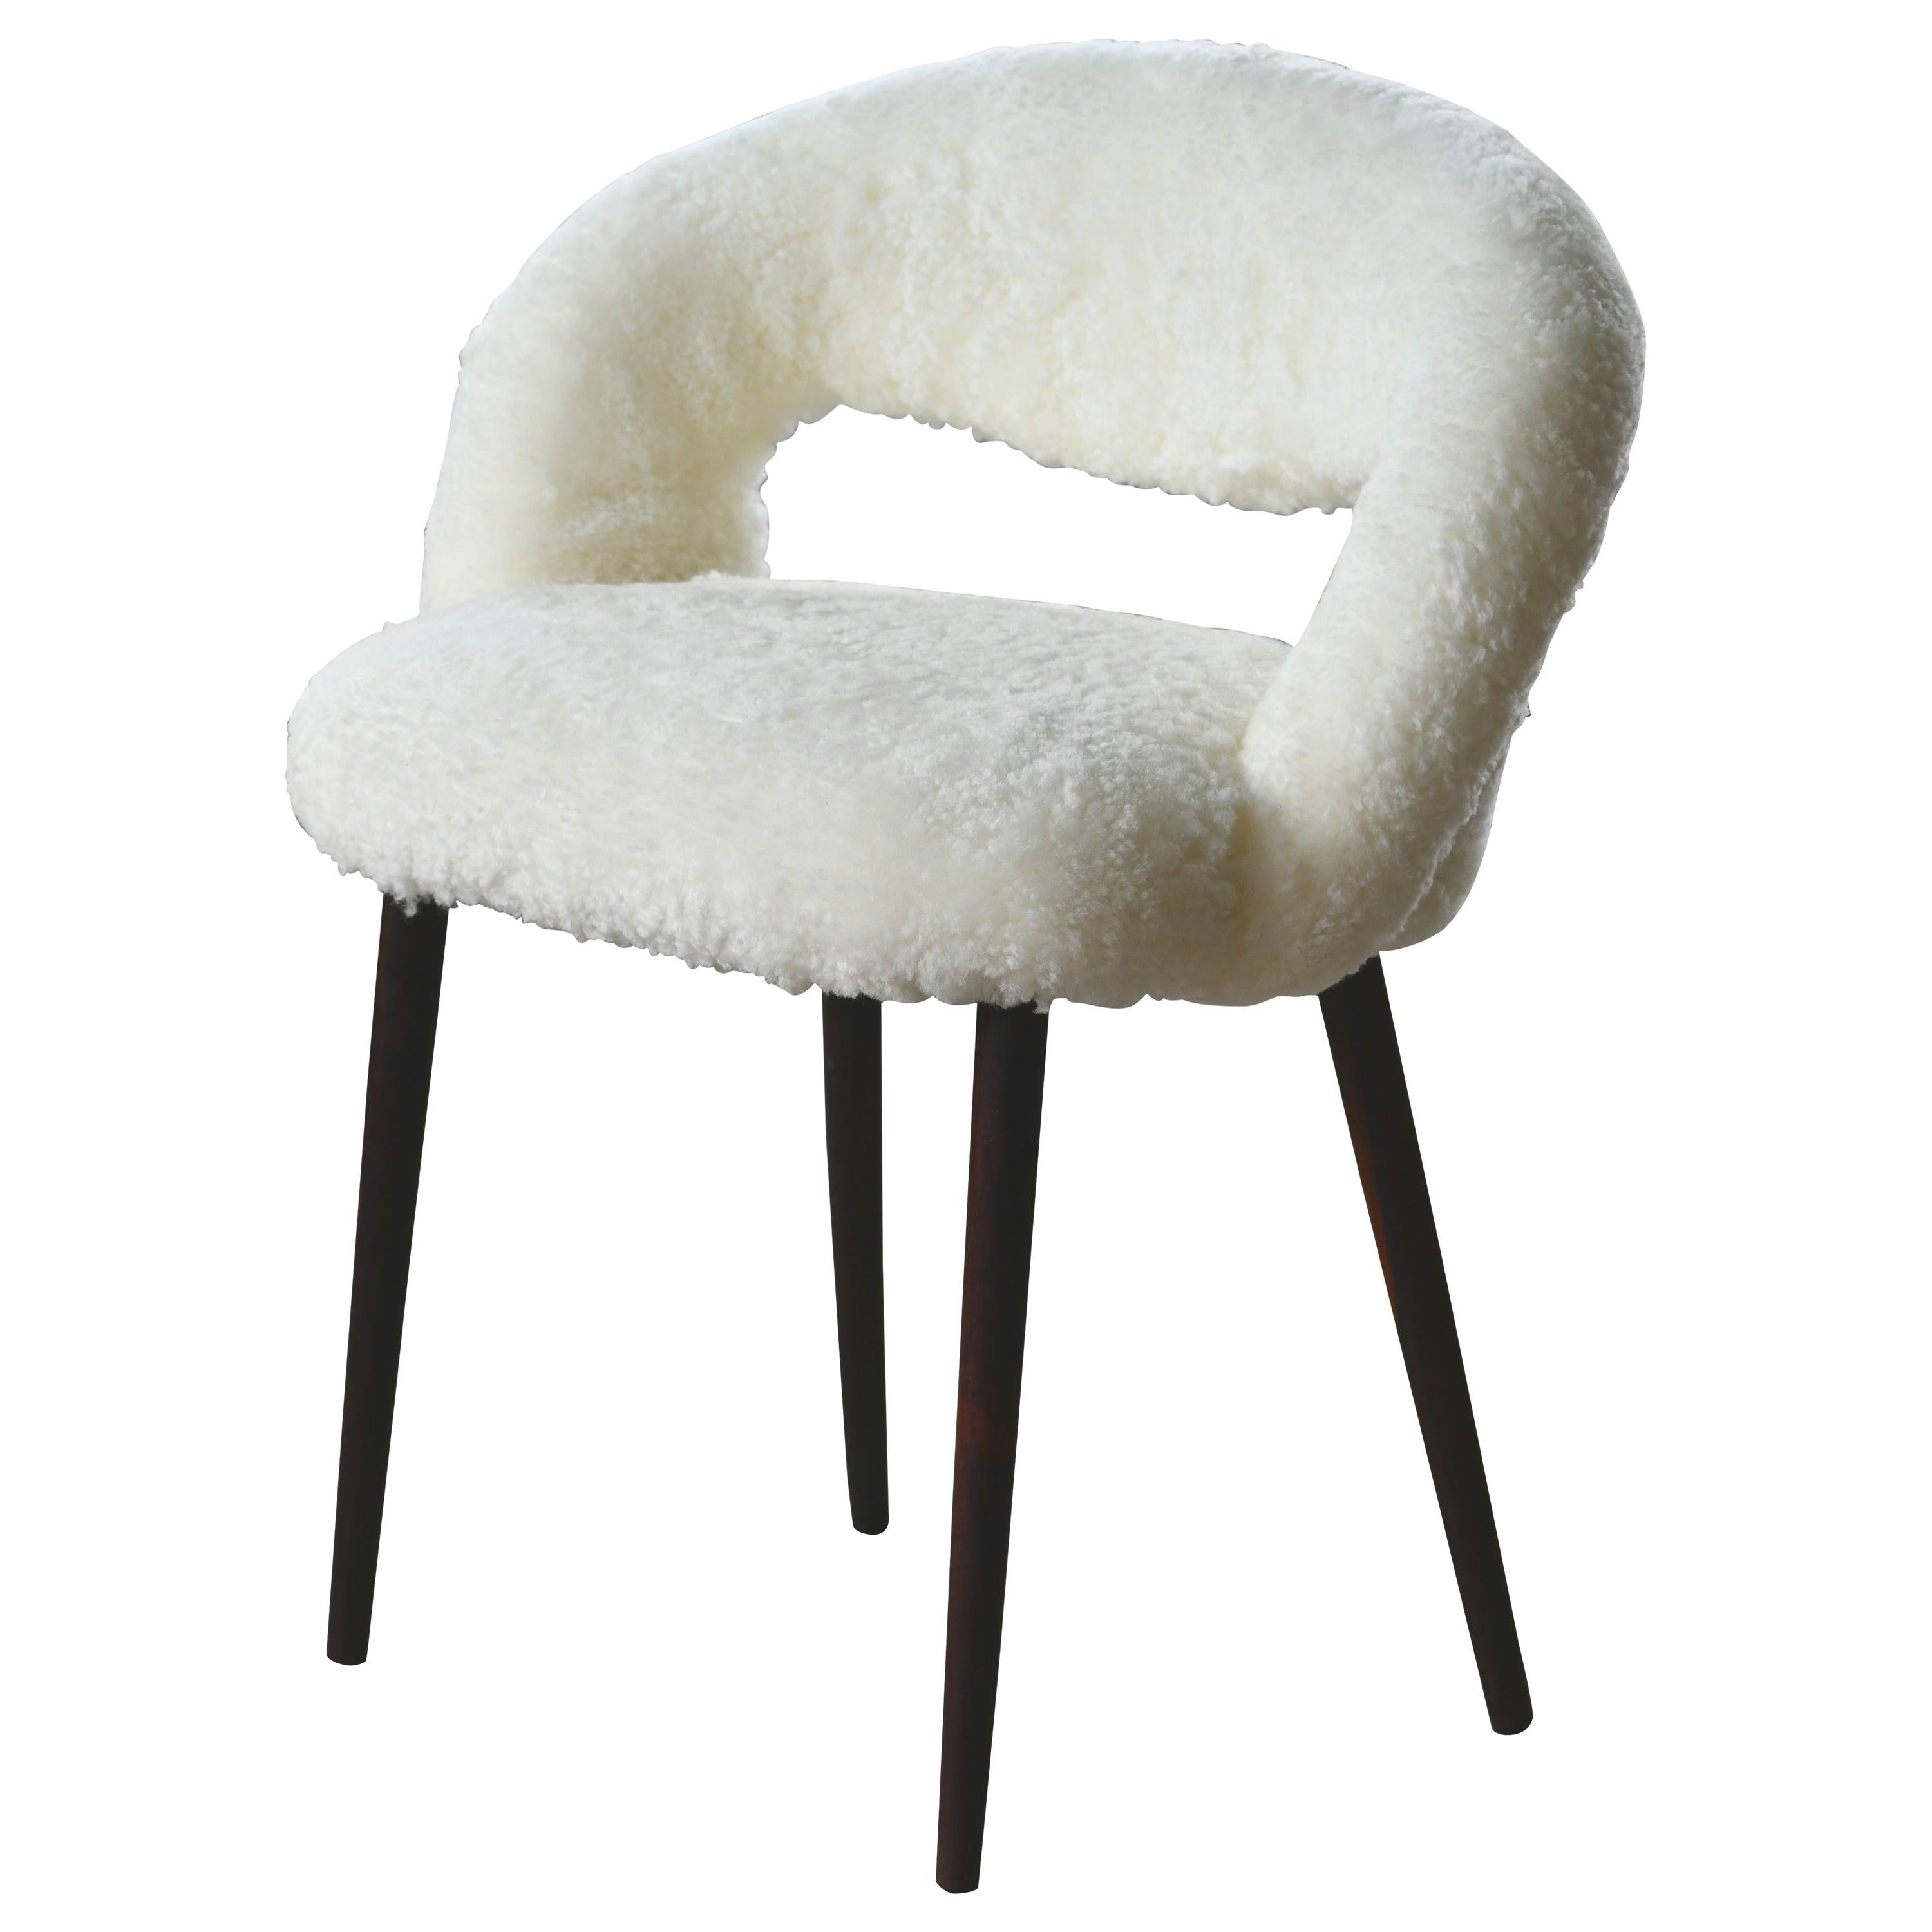 Midcentury Danish Vanity or Dressing Room Chair in Shearling by Frode Holm